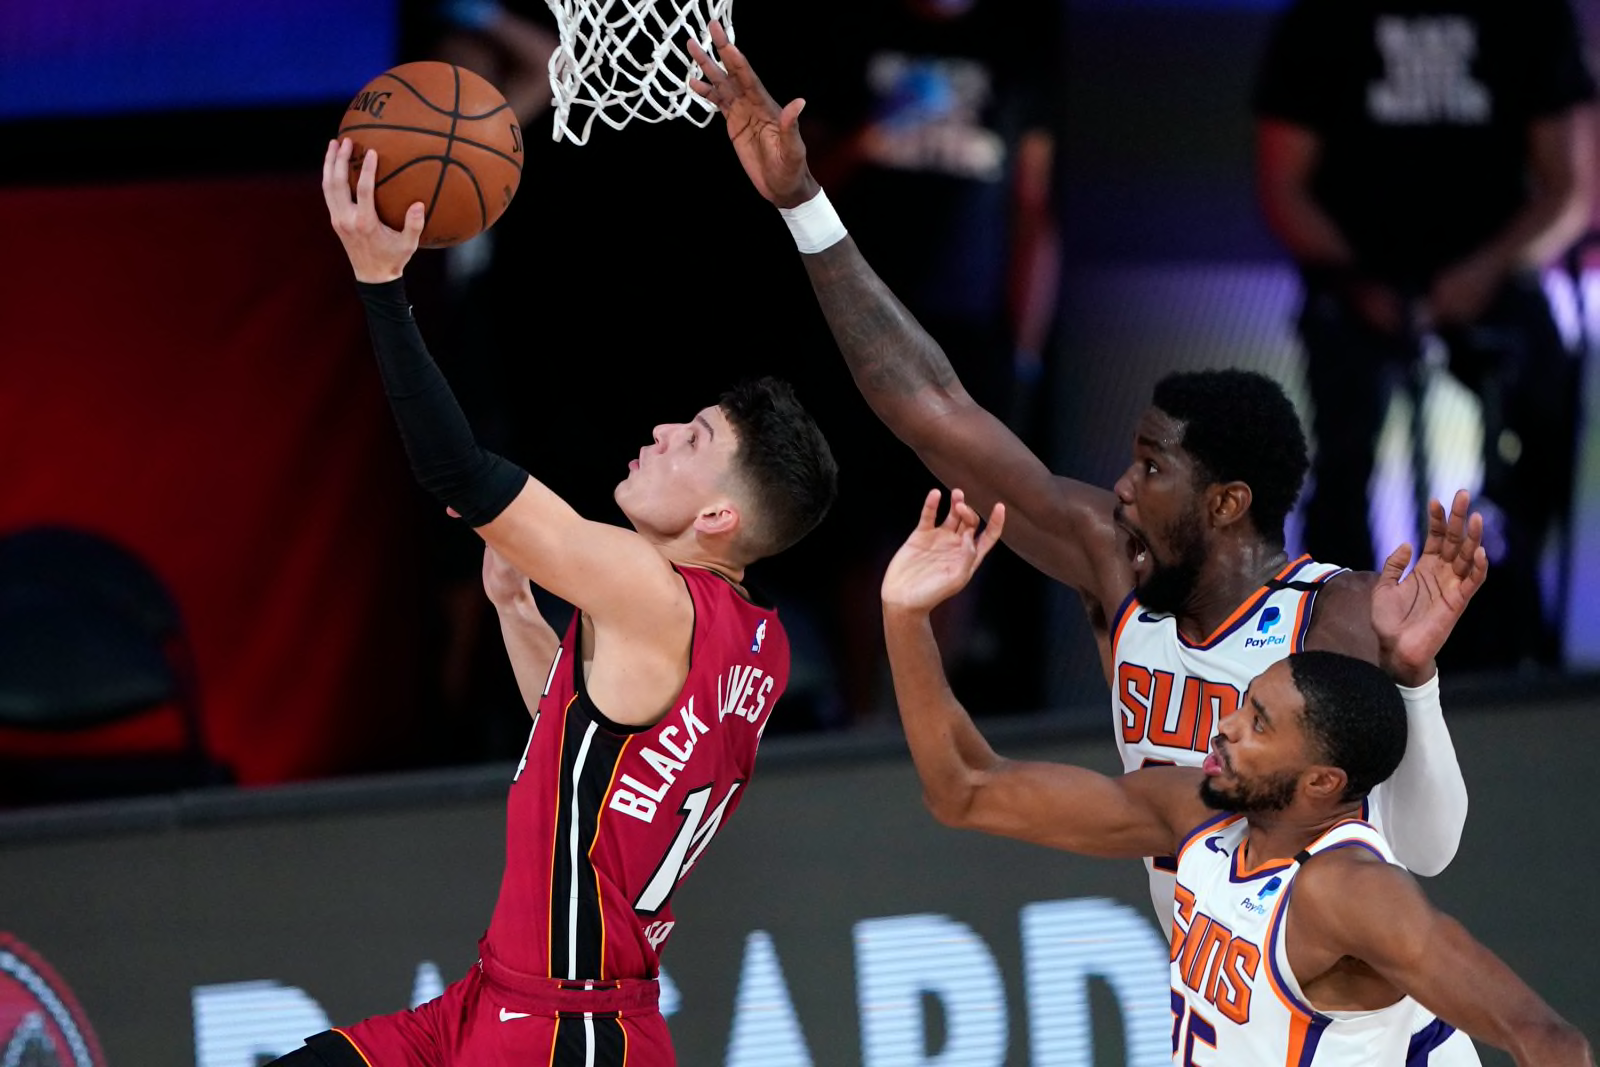 Shared experiences formed lasting bond for Tyler Herro and mentor Devin  Booker - PHNX